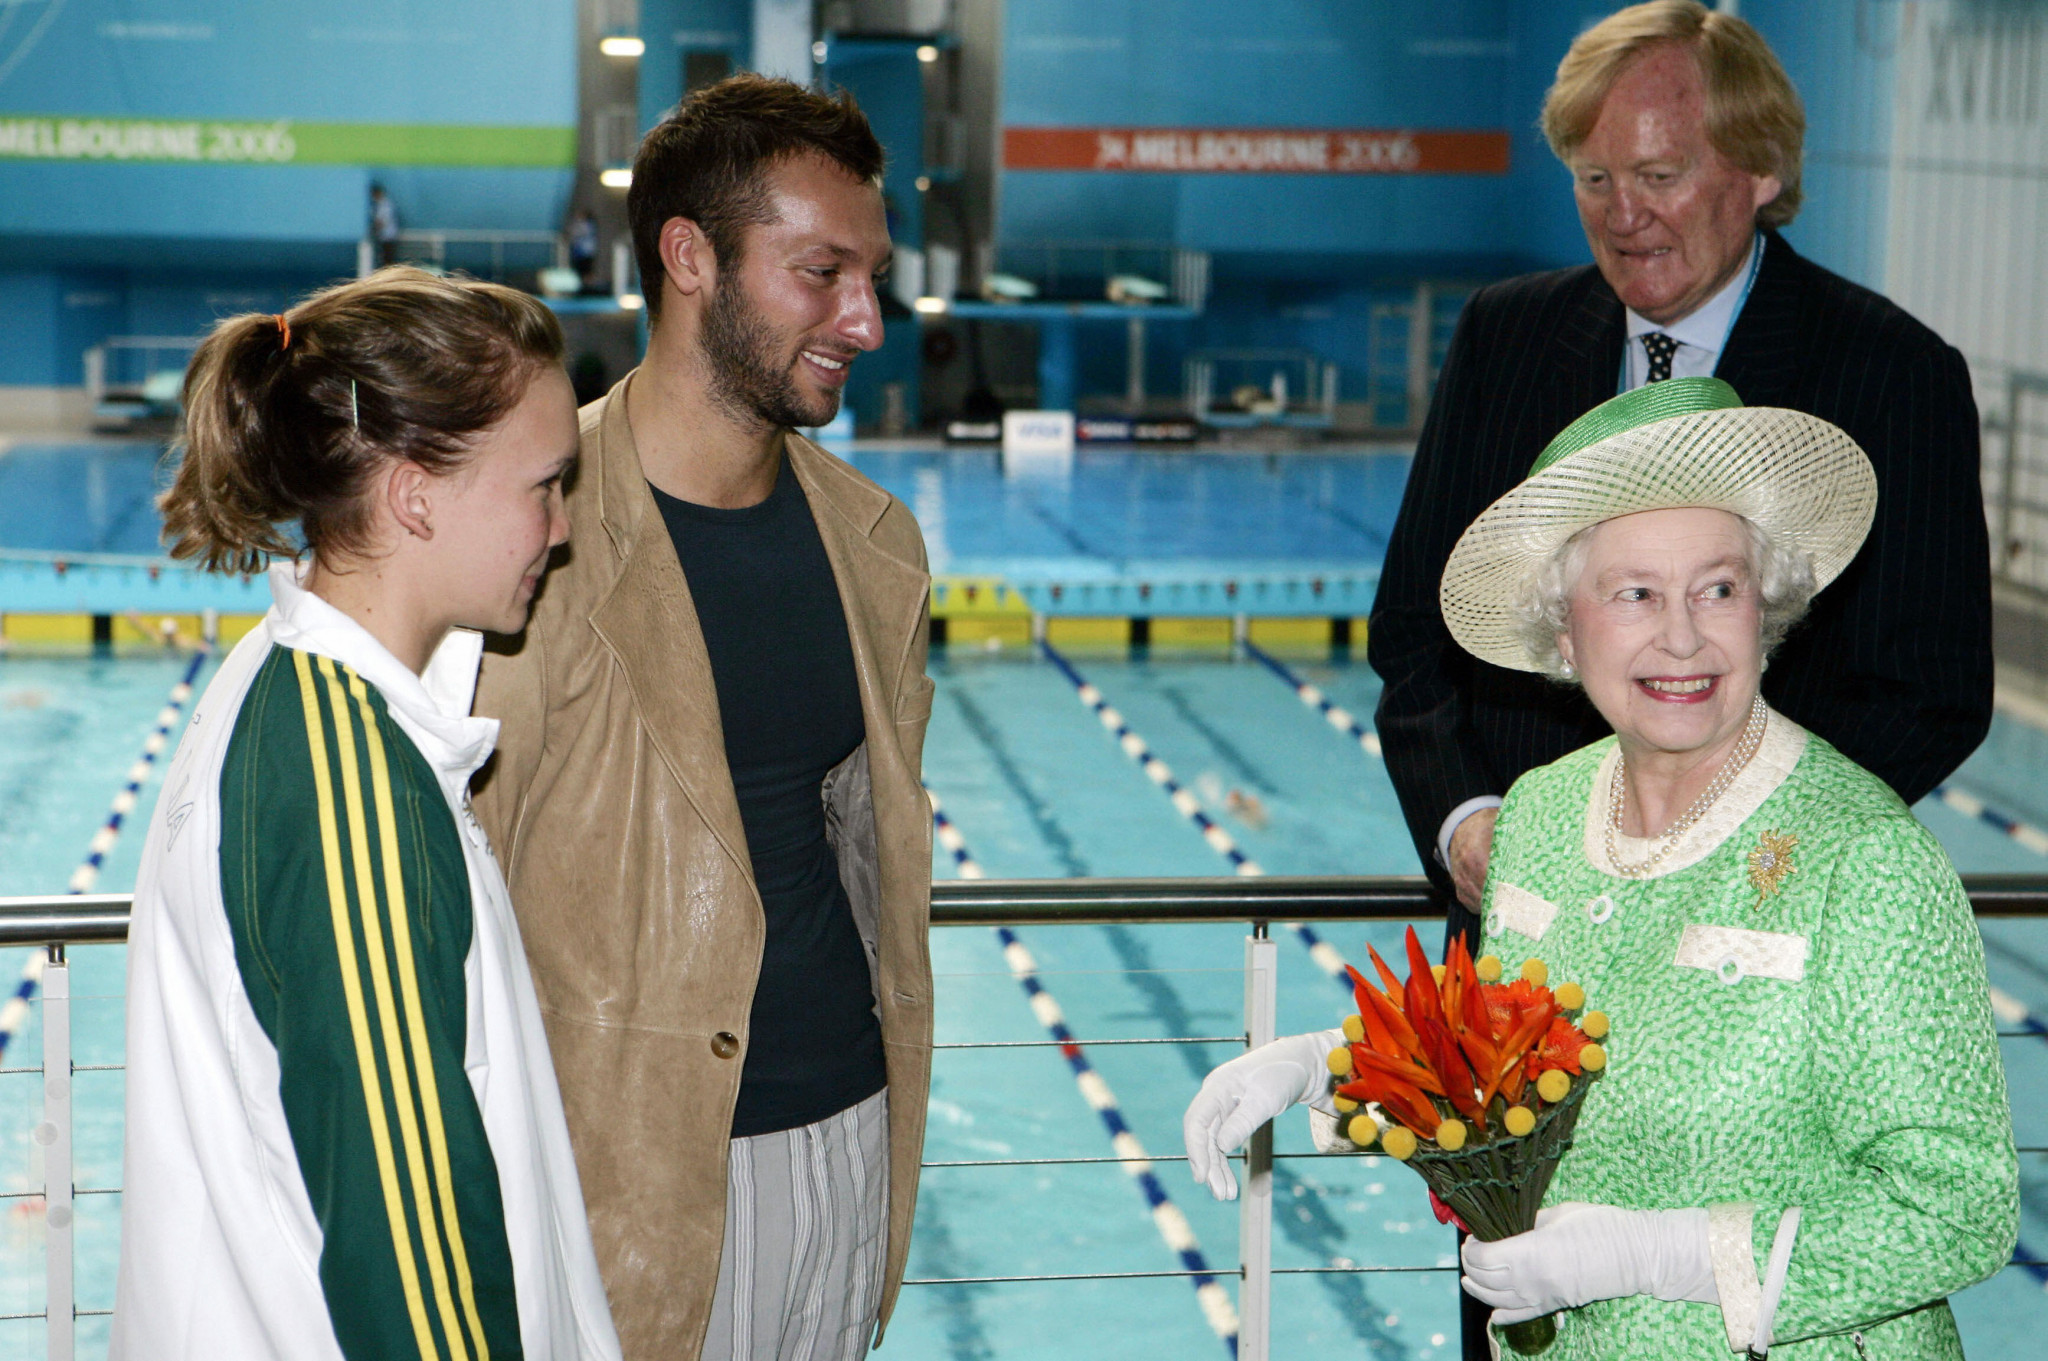 Ron Walker, right, accompanied the Queen during her visit to the 2006 Commonwealth Games in Melbourne ©Getty Images